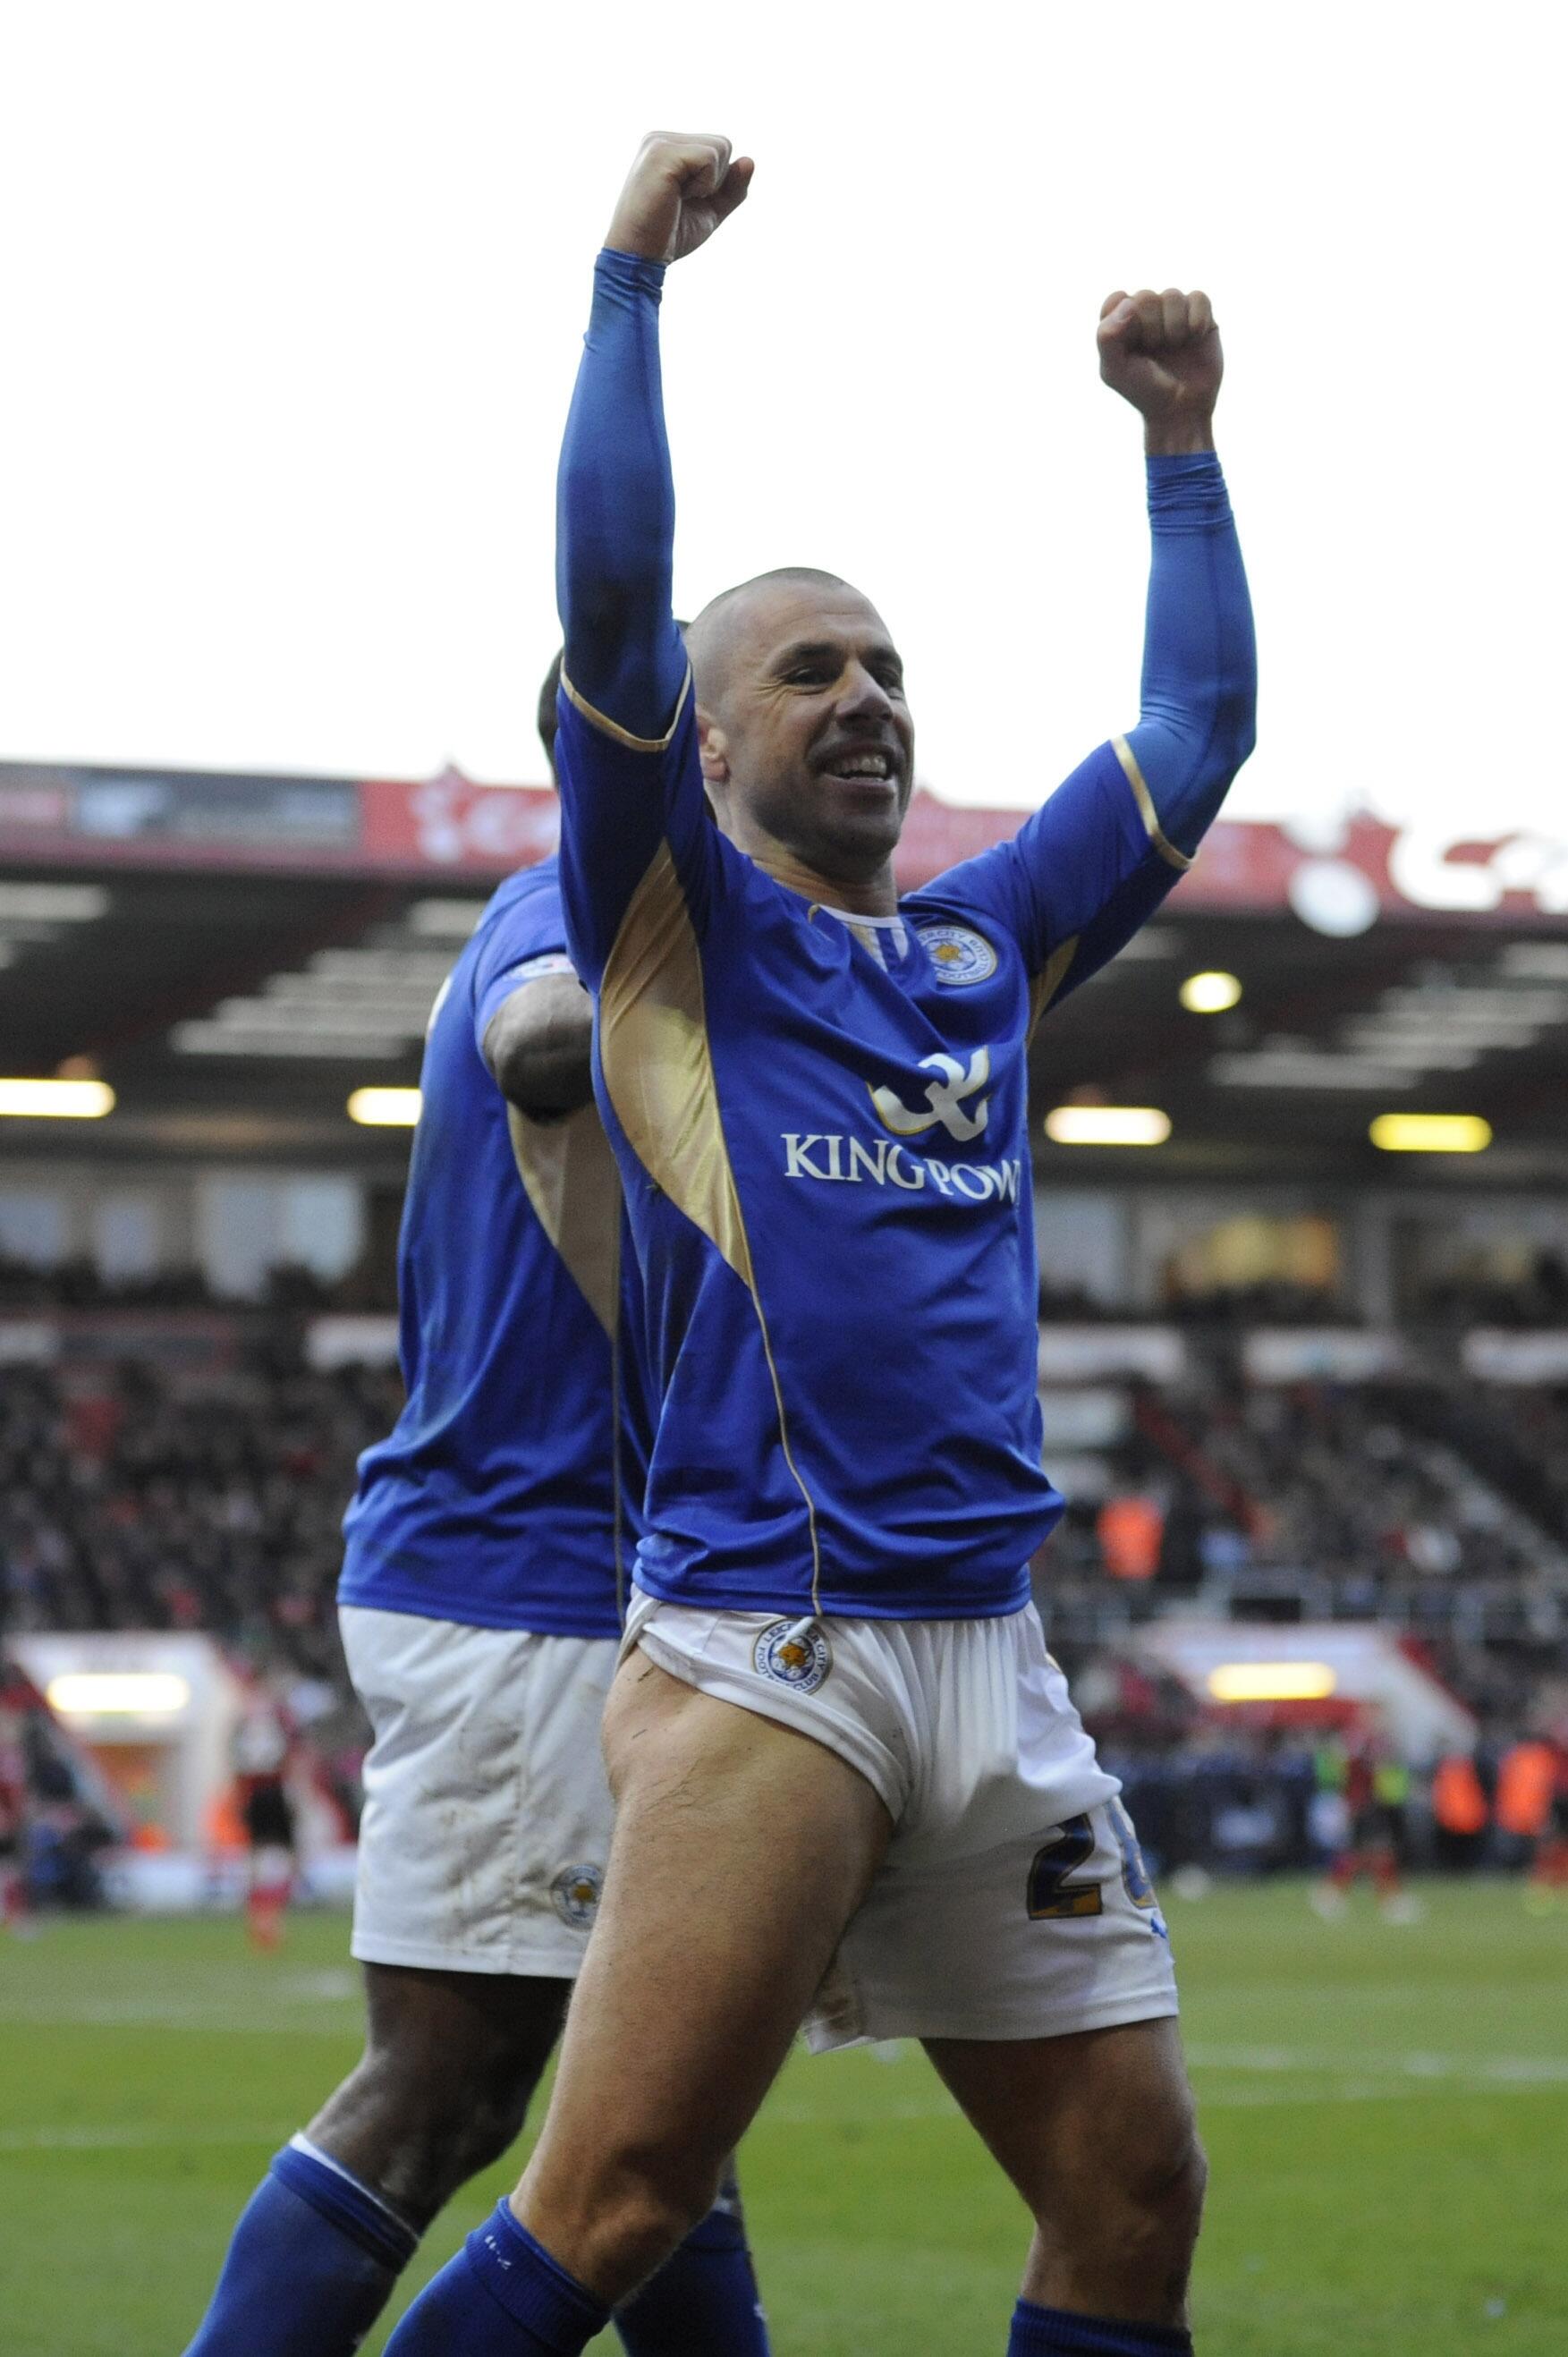 c Sport Leicester City Striker Kevin Phillips Has Announced His Retirement From Football At The Age Of 40 Http T Co Fcfeo1embd Twitter